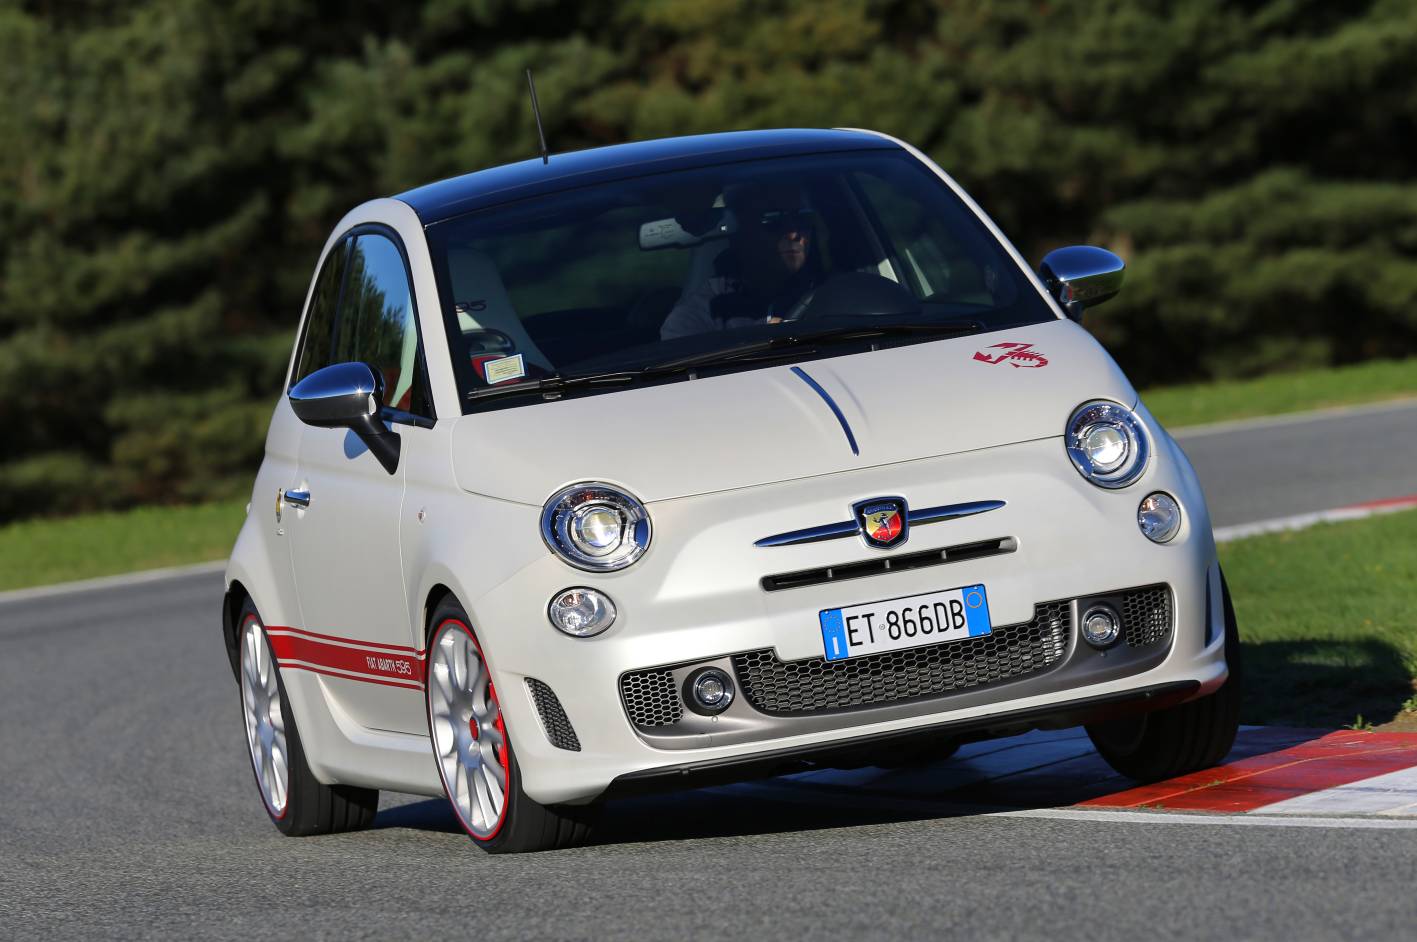 Fiat Cars News Abarth 595 ‘50th Anniversary’ launched